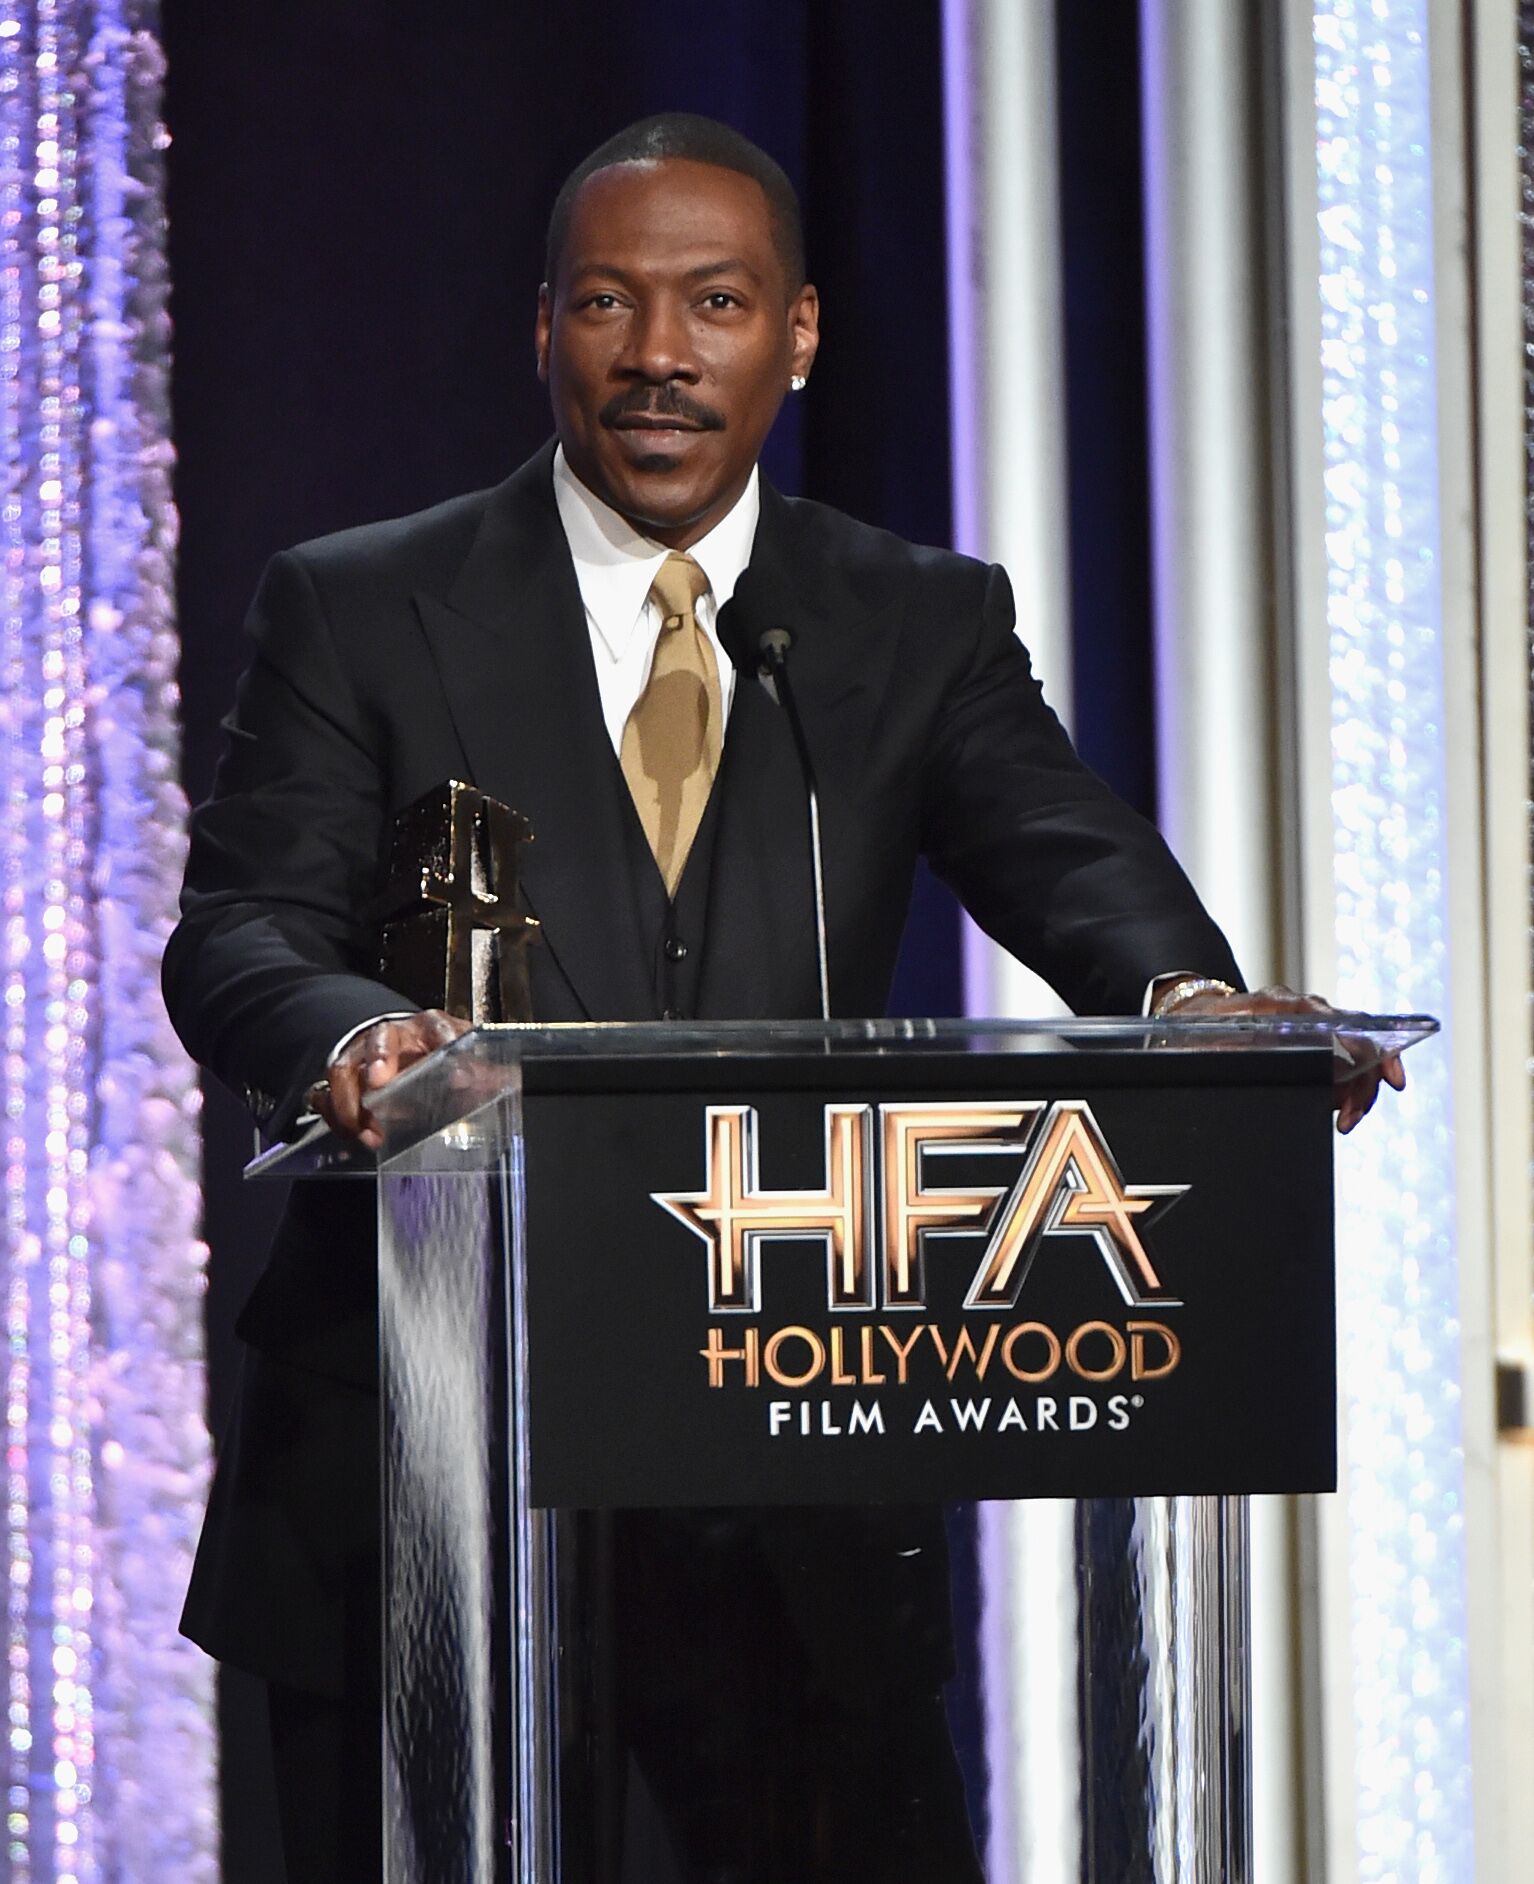 Eddie Murphy at the Hollywood Film Awards | Source: Getty Images/GlobalImagesUkraine